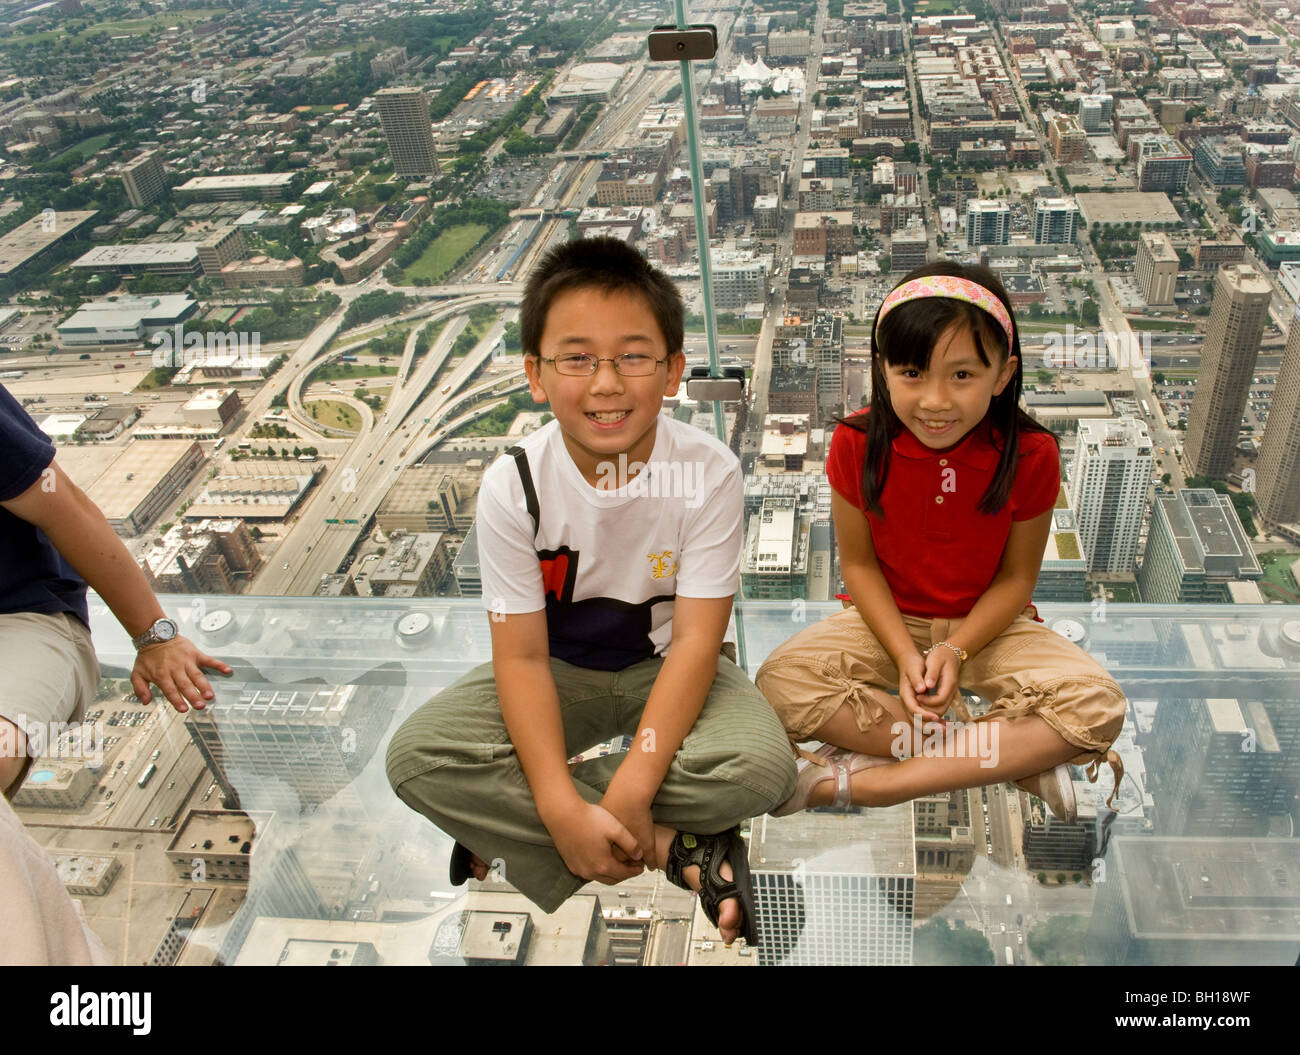 Willis Tower (formerly Sears Tower) in Chicago Illinois, the tallest building in North America, features all-glass viewing ledge Stock Photo